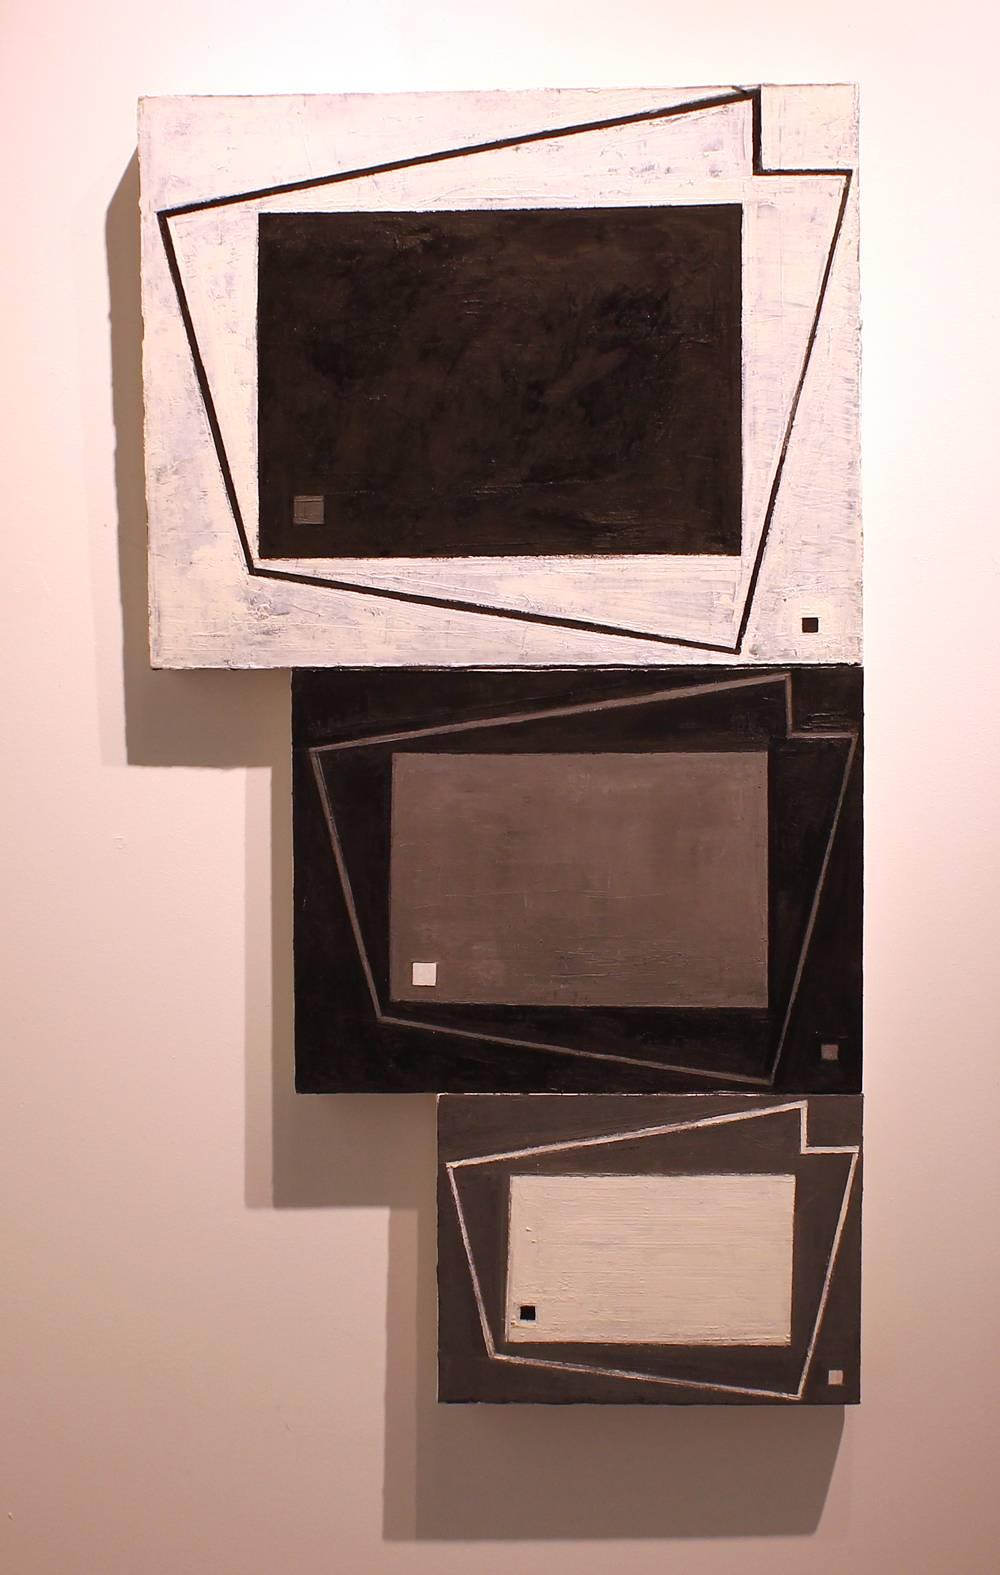 Untitled #4-99, oil painting on three canvases - Painting by Ron Shuebrook